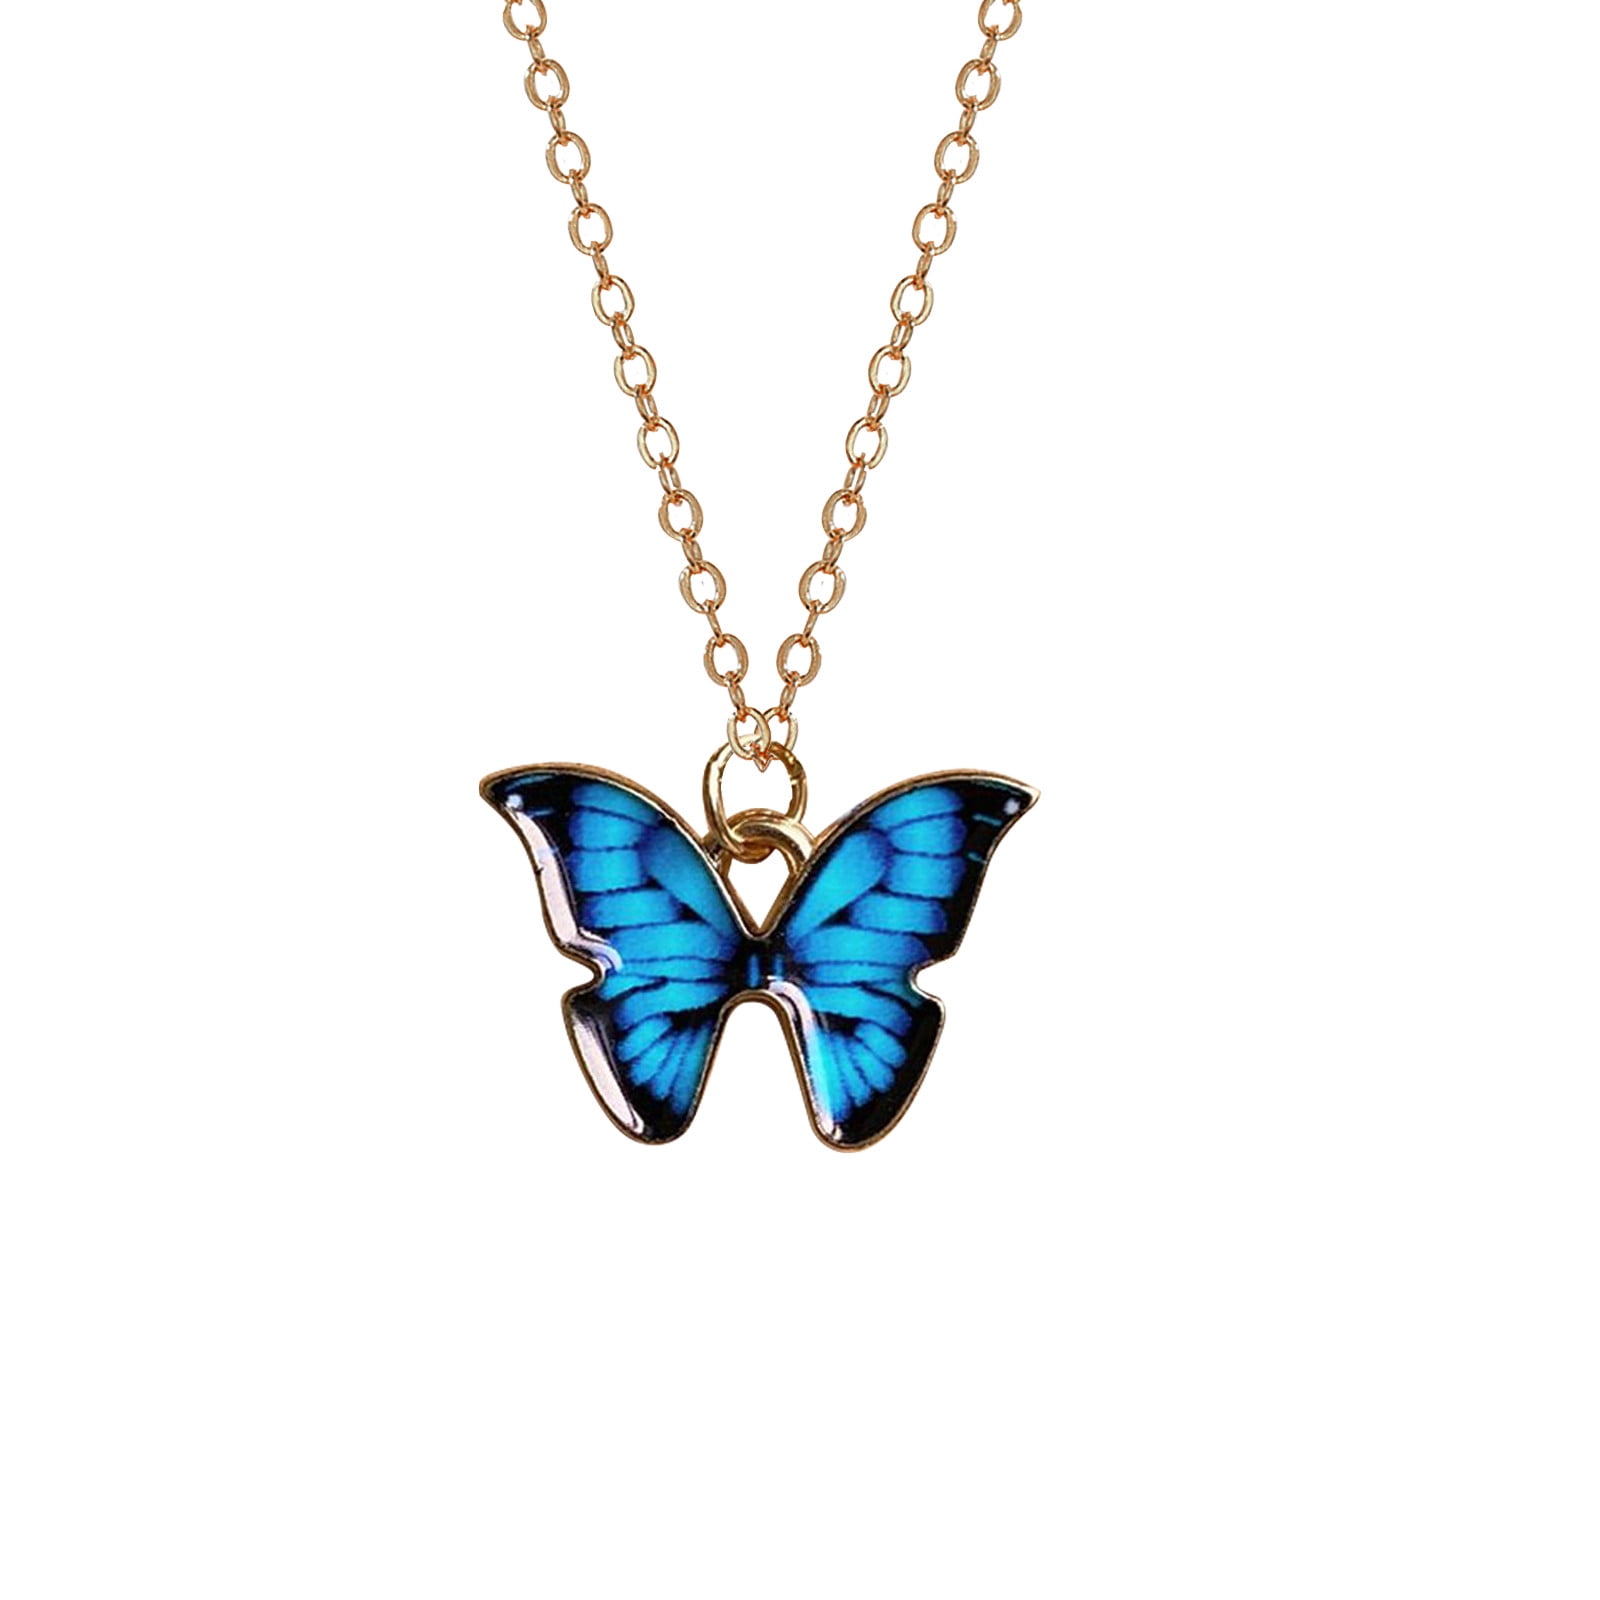 Frehsky necklaces for women Butterfly Necklace Pendant For Women ...